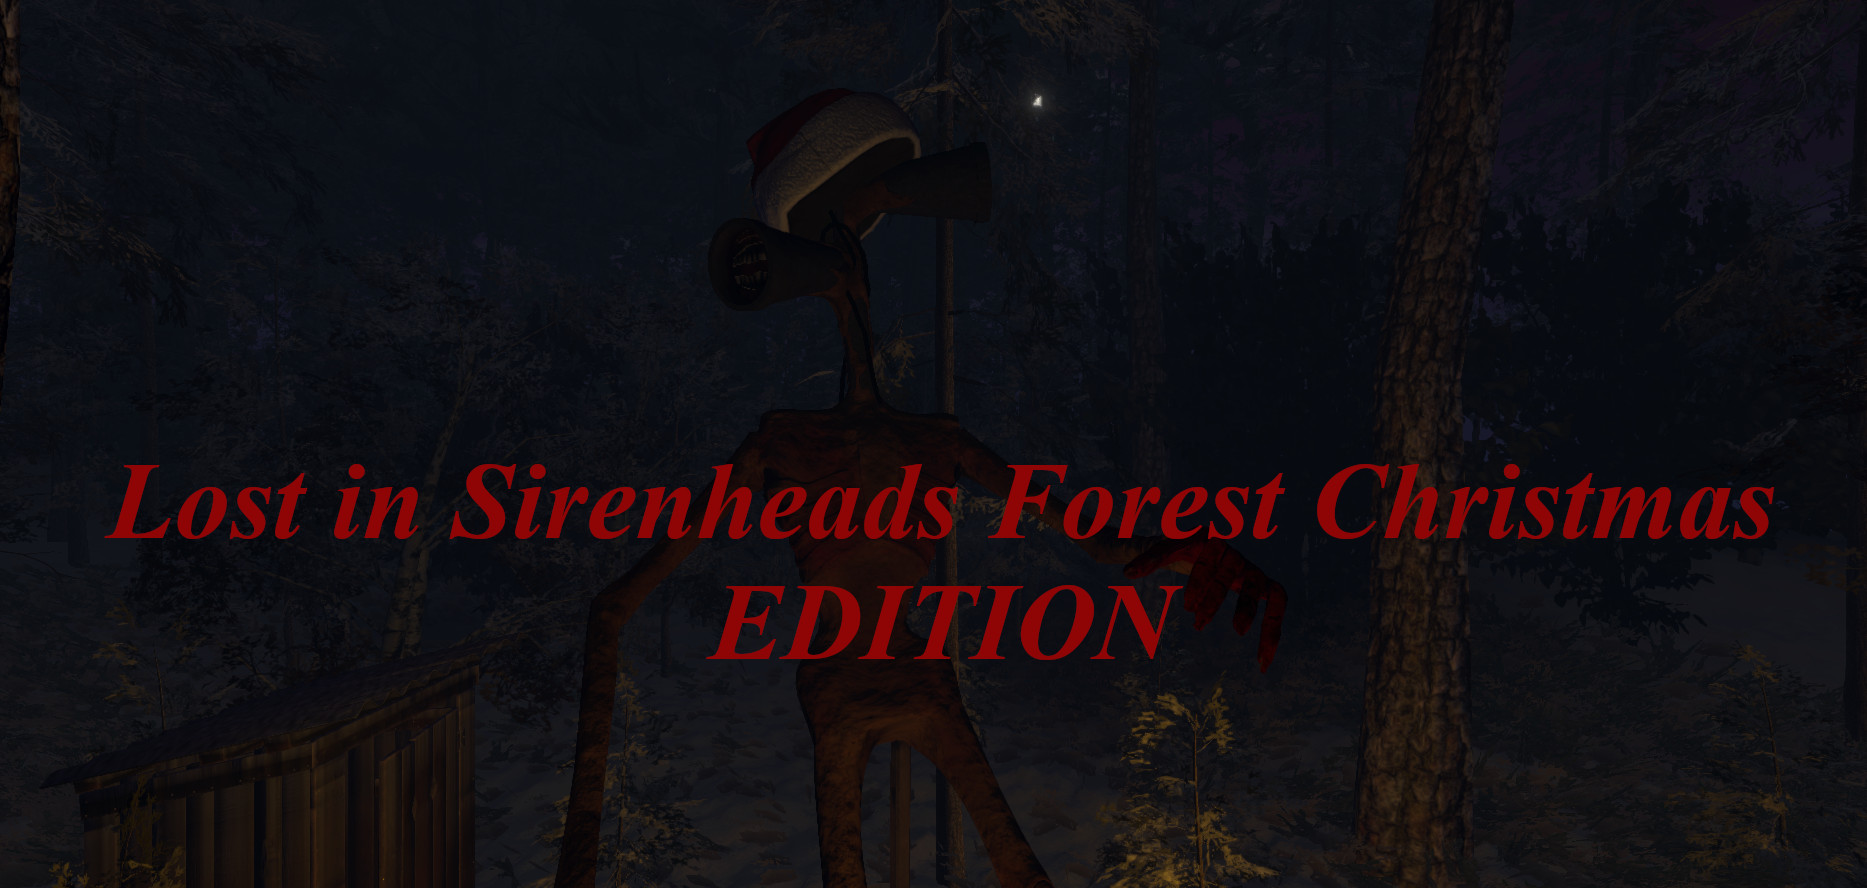 Lost in Sirenheads Forest 2.0 Christmas EDITION